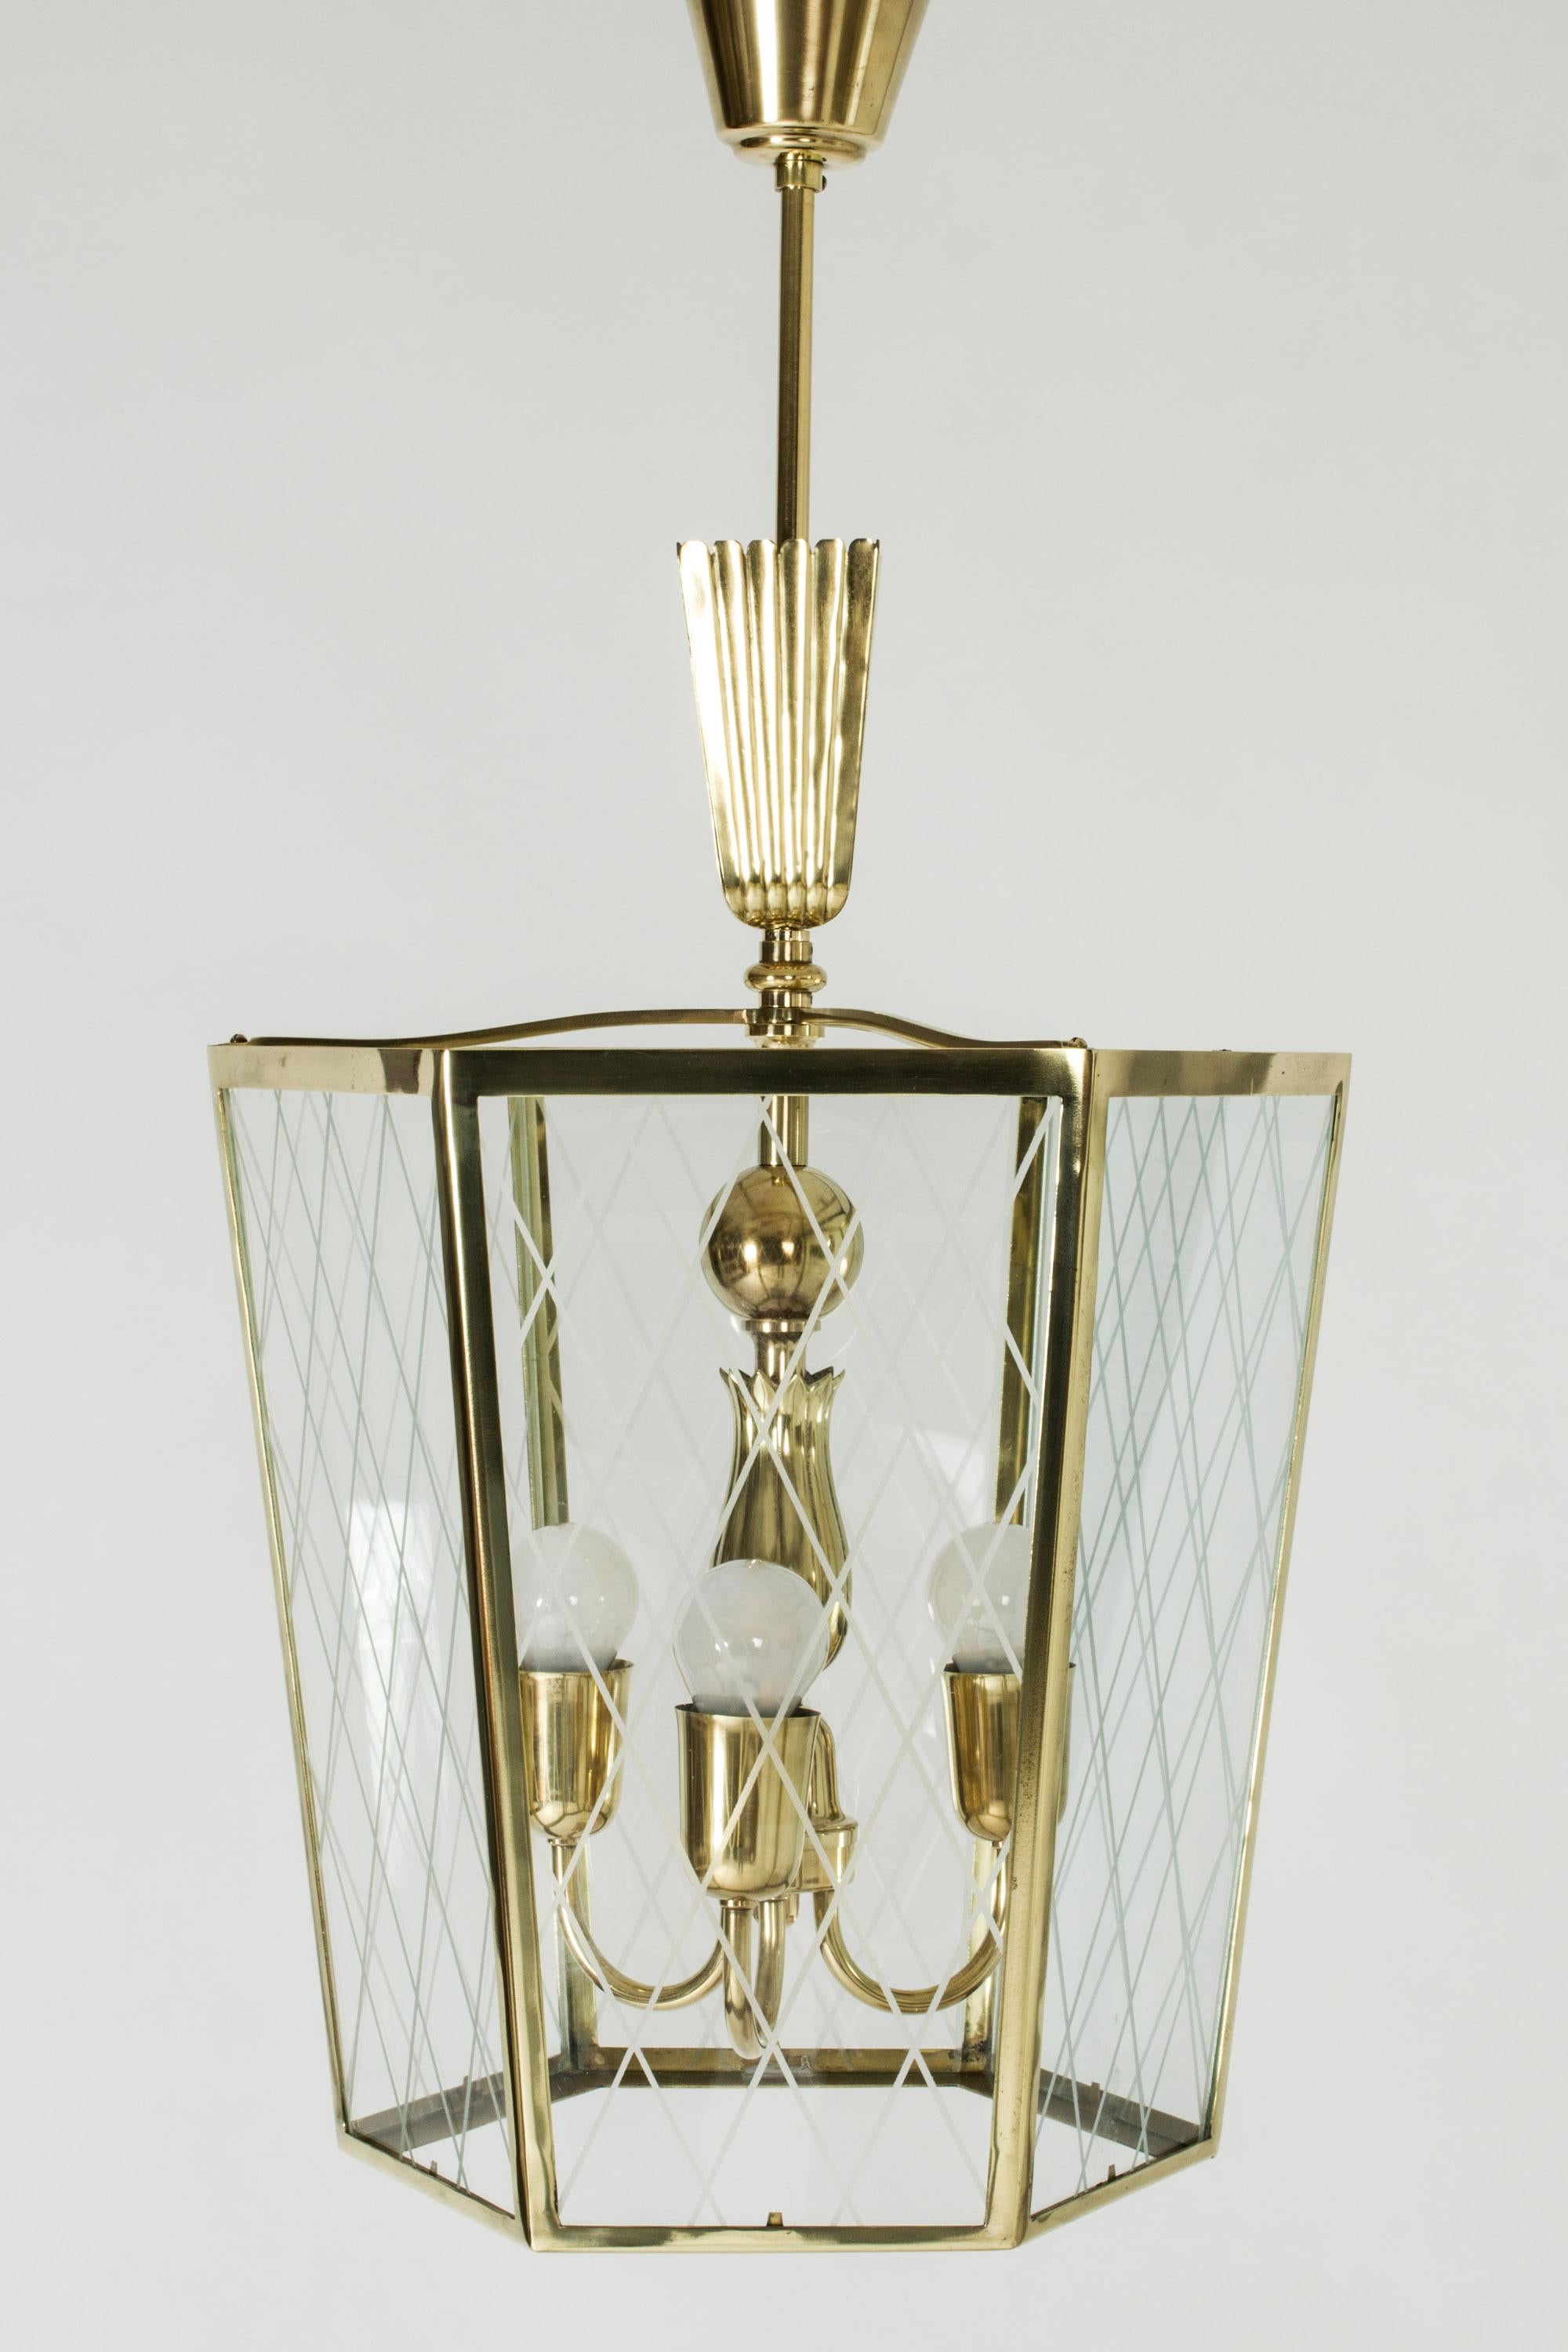 Elegant Swedish Modern ceiling light, made from brass with lovely details. Glass sides with decor of frosted stripes in a diamond pattern.